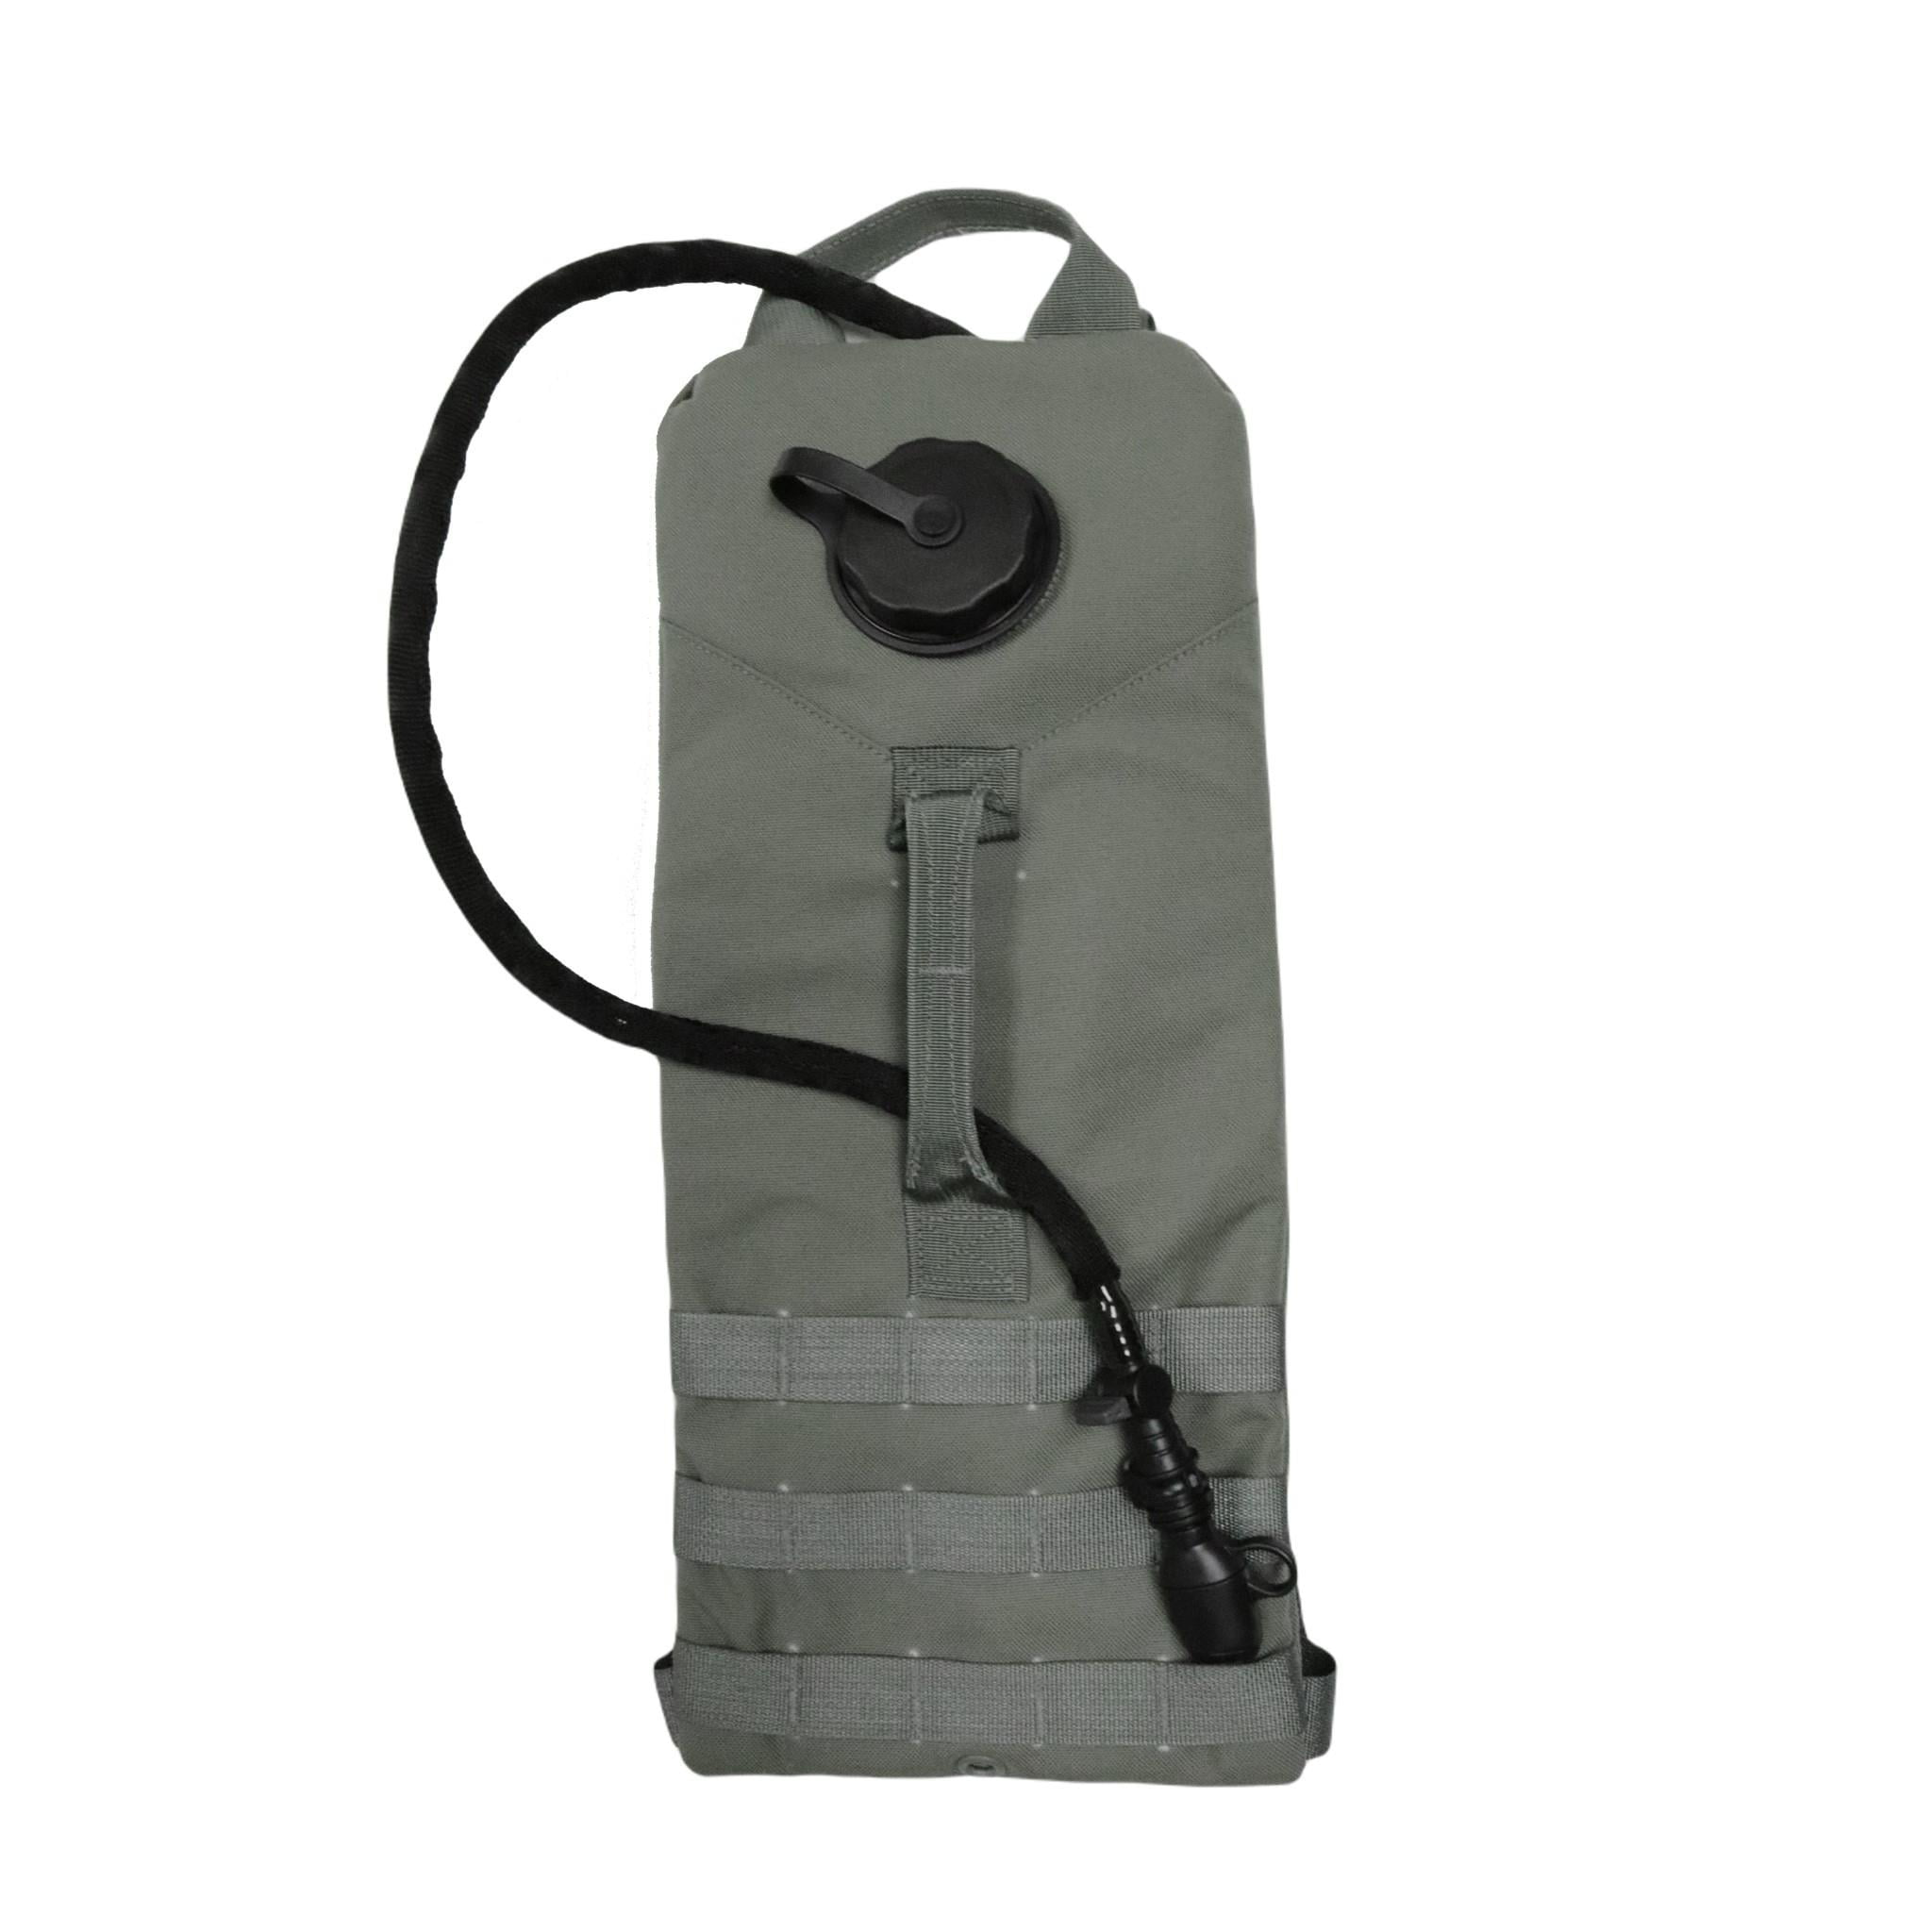 100 Oz. Bladder MOLLE Hydration Carrier with 3L/100 Oz Genuine US Military GI 